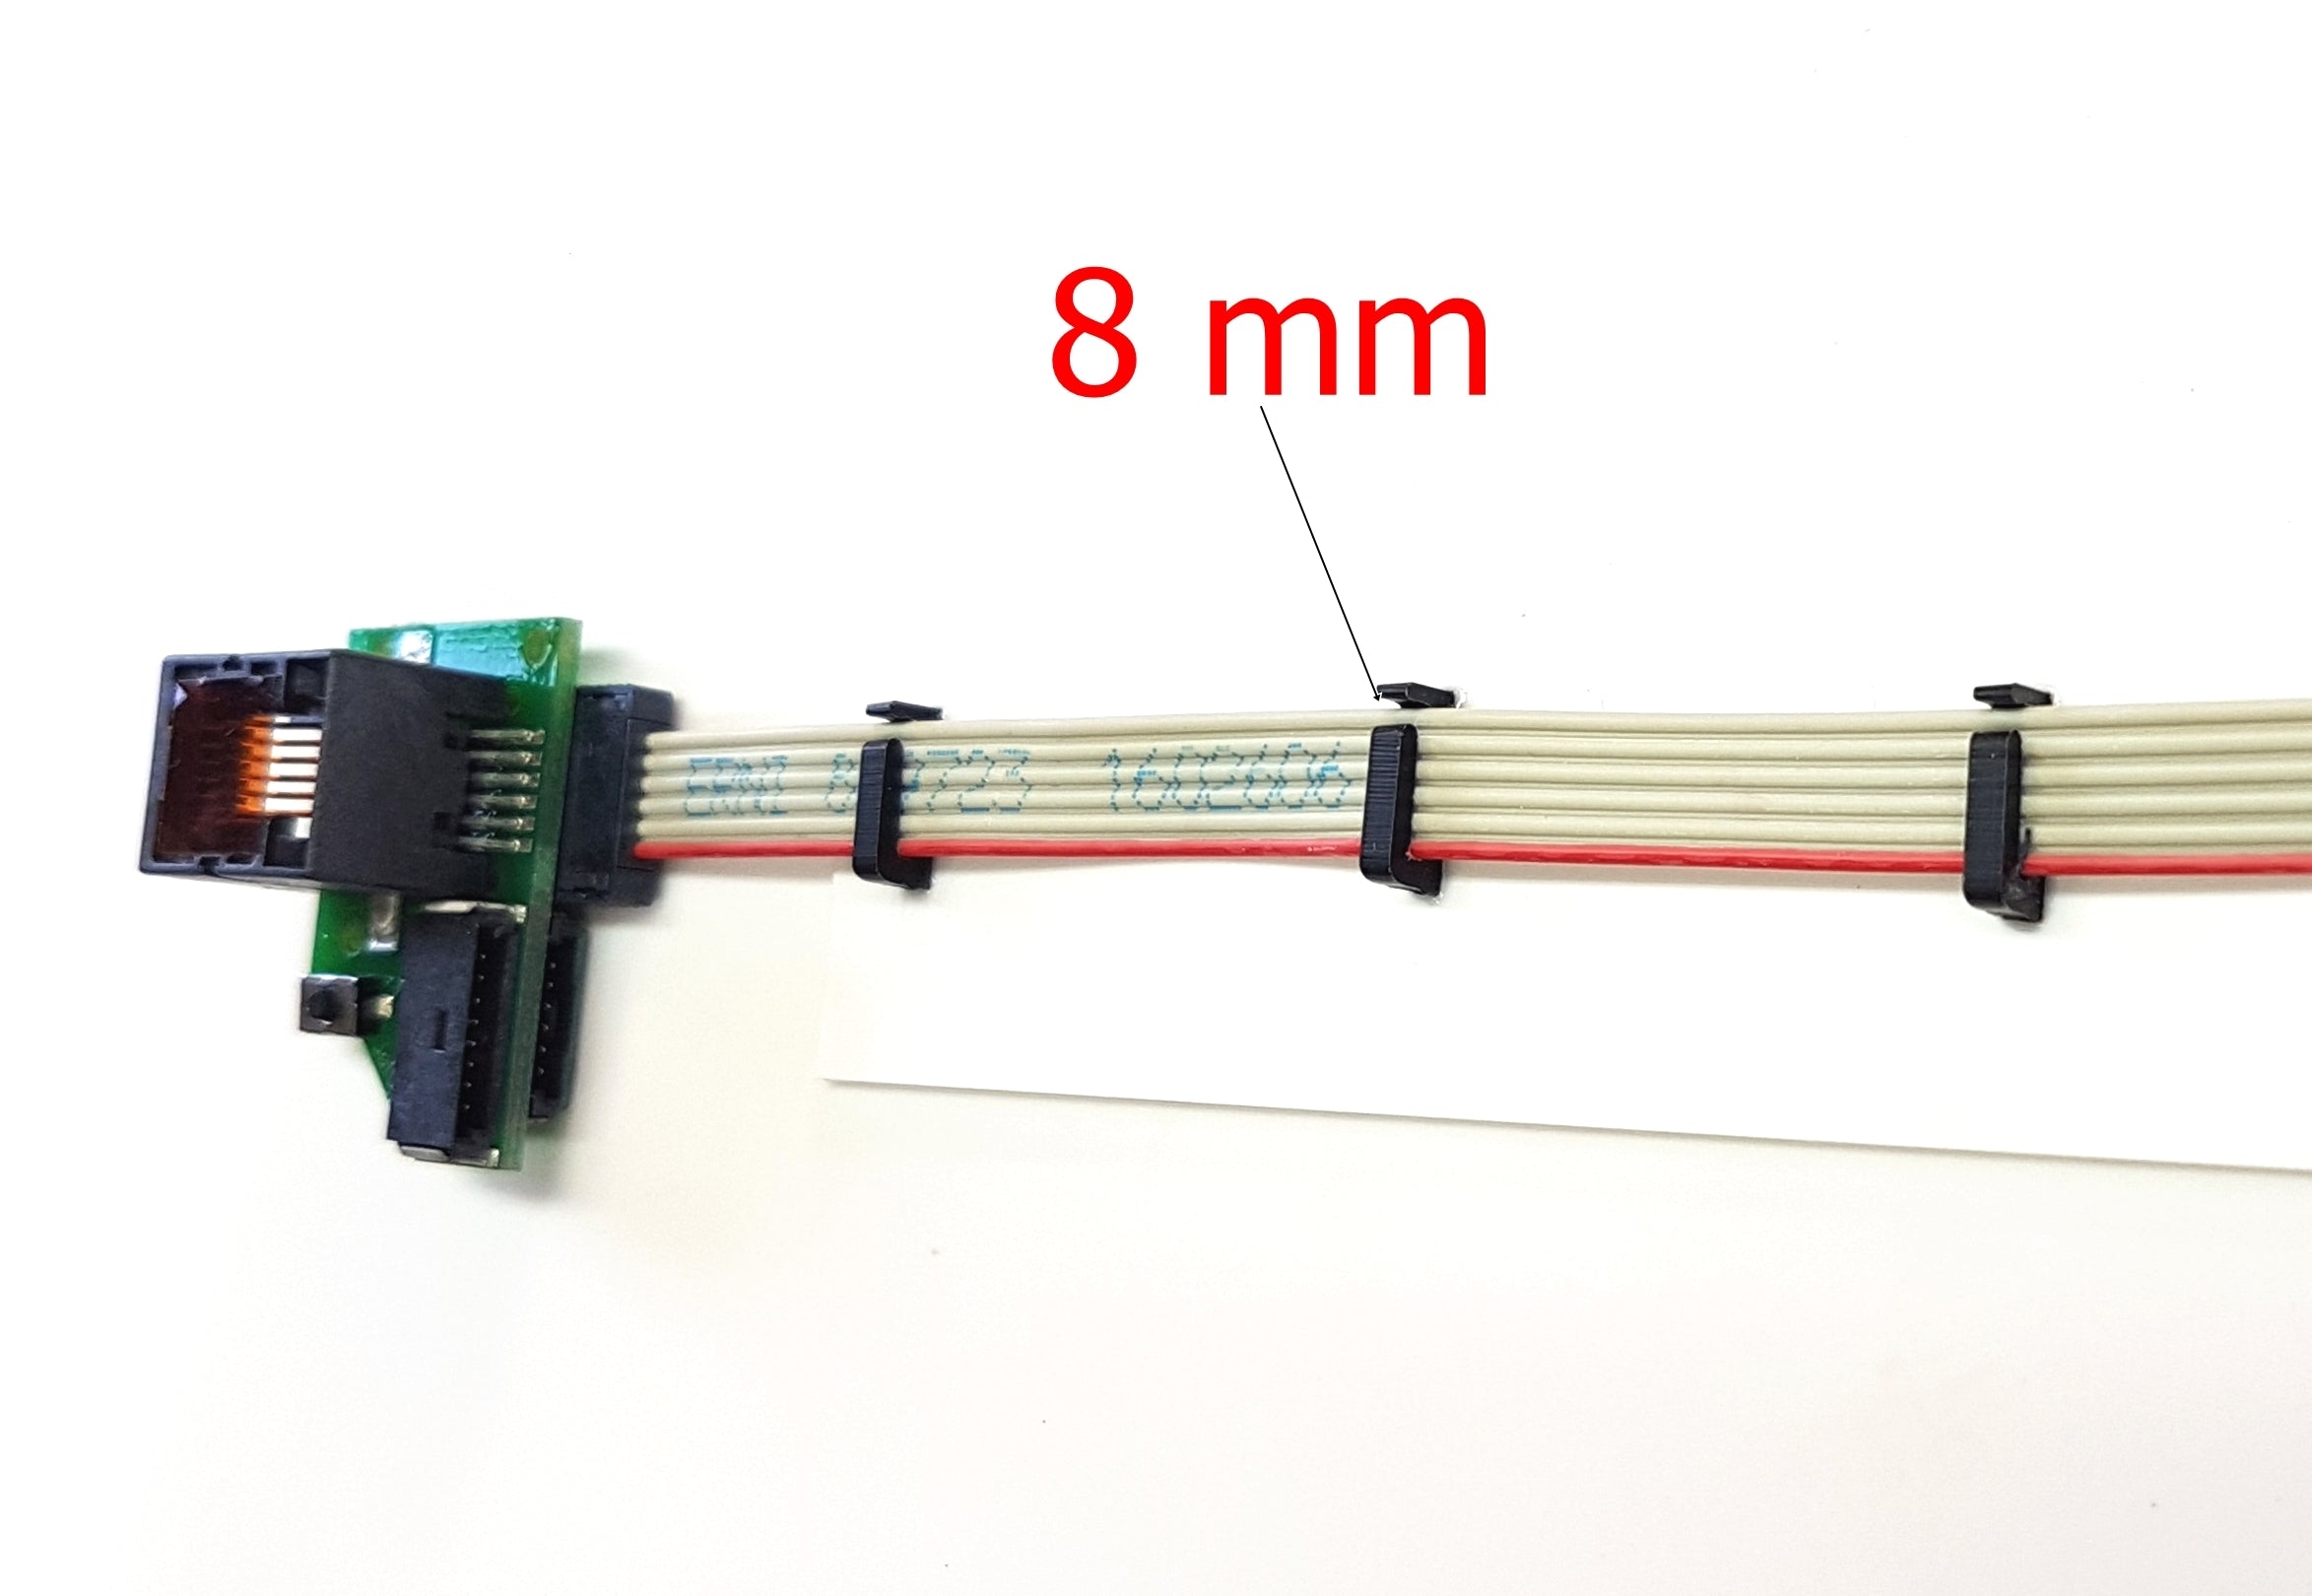 Ribbon Cable Holder 8mm Click Holder from STV-Tech 012-23